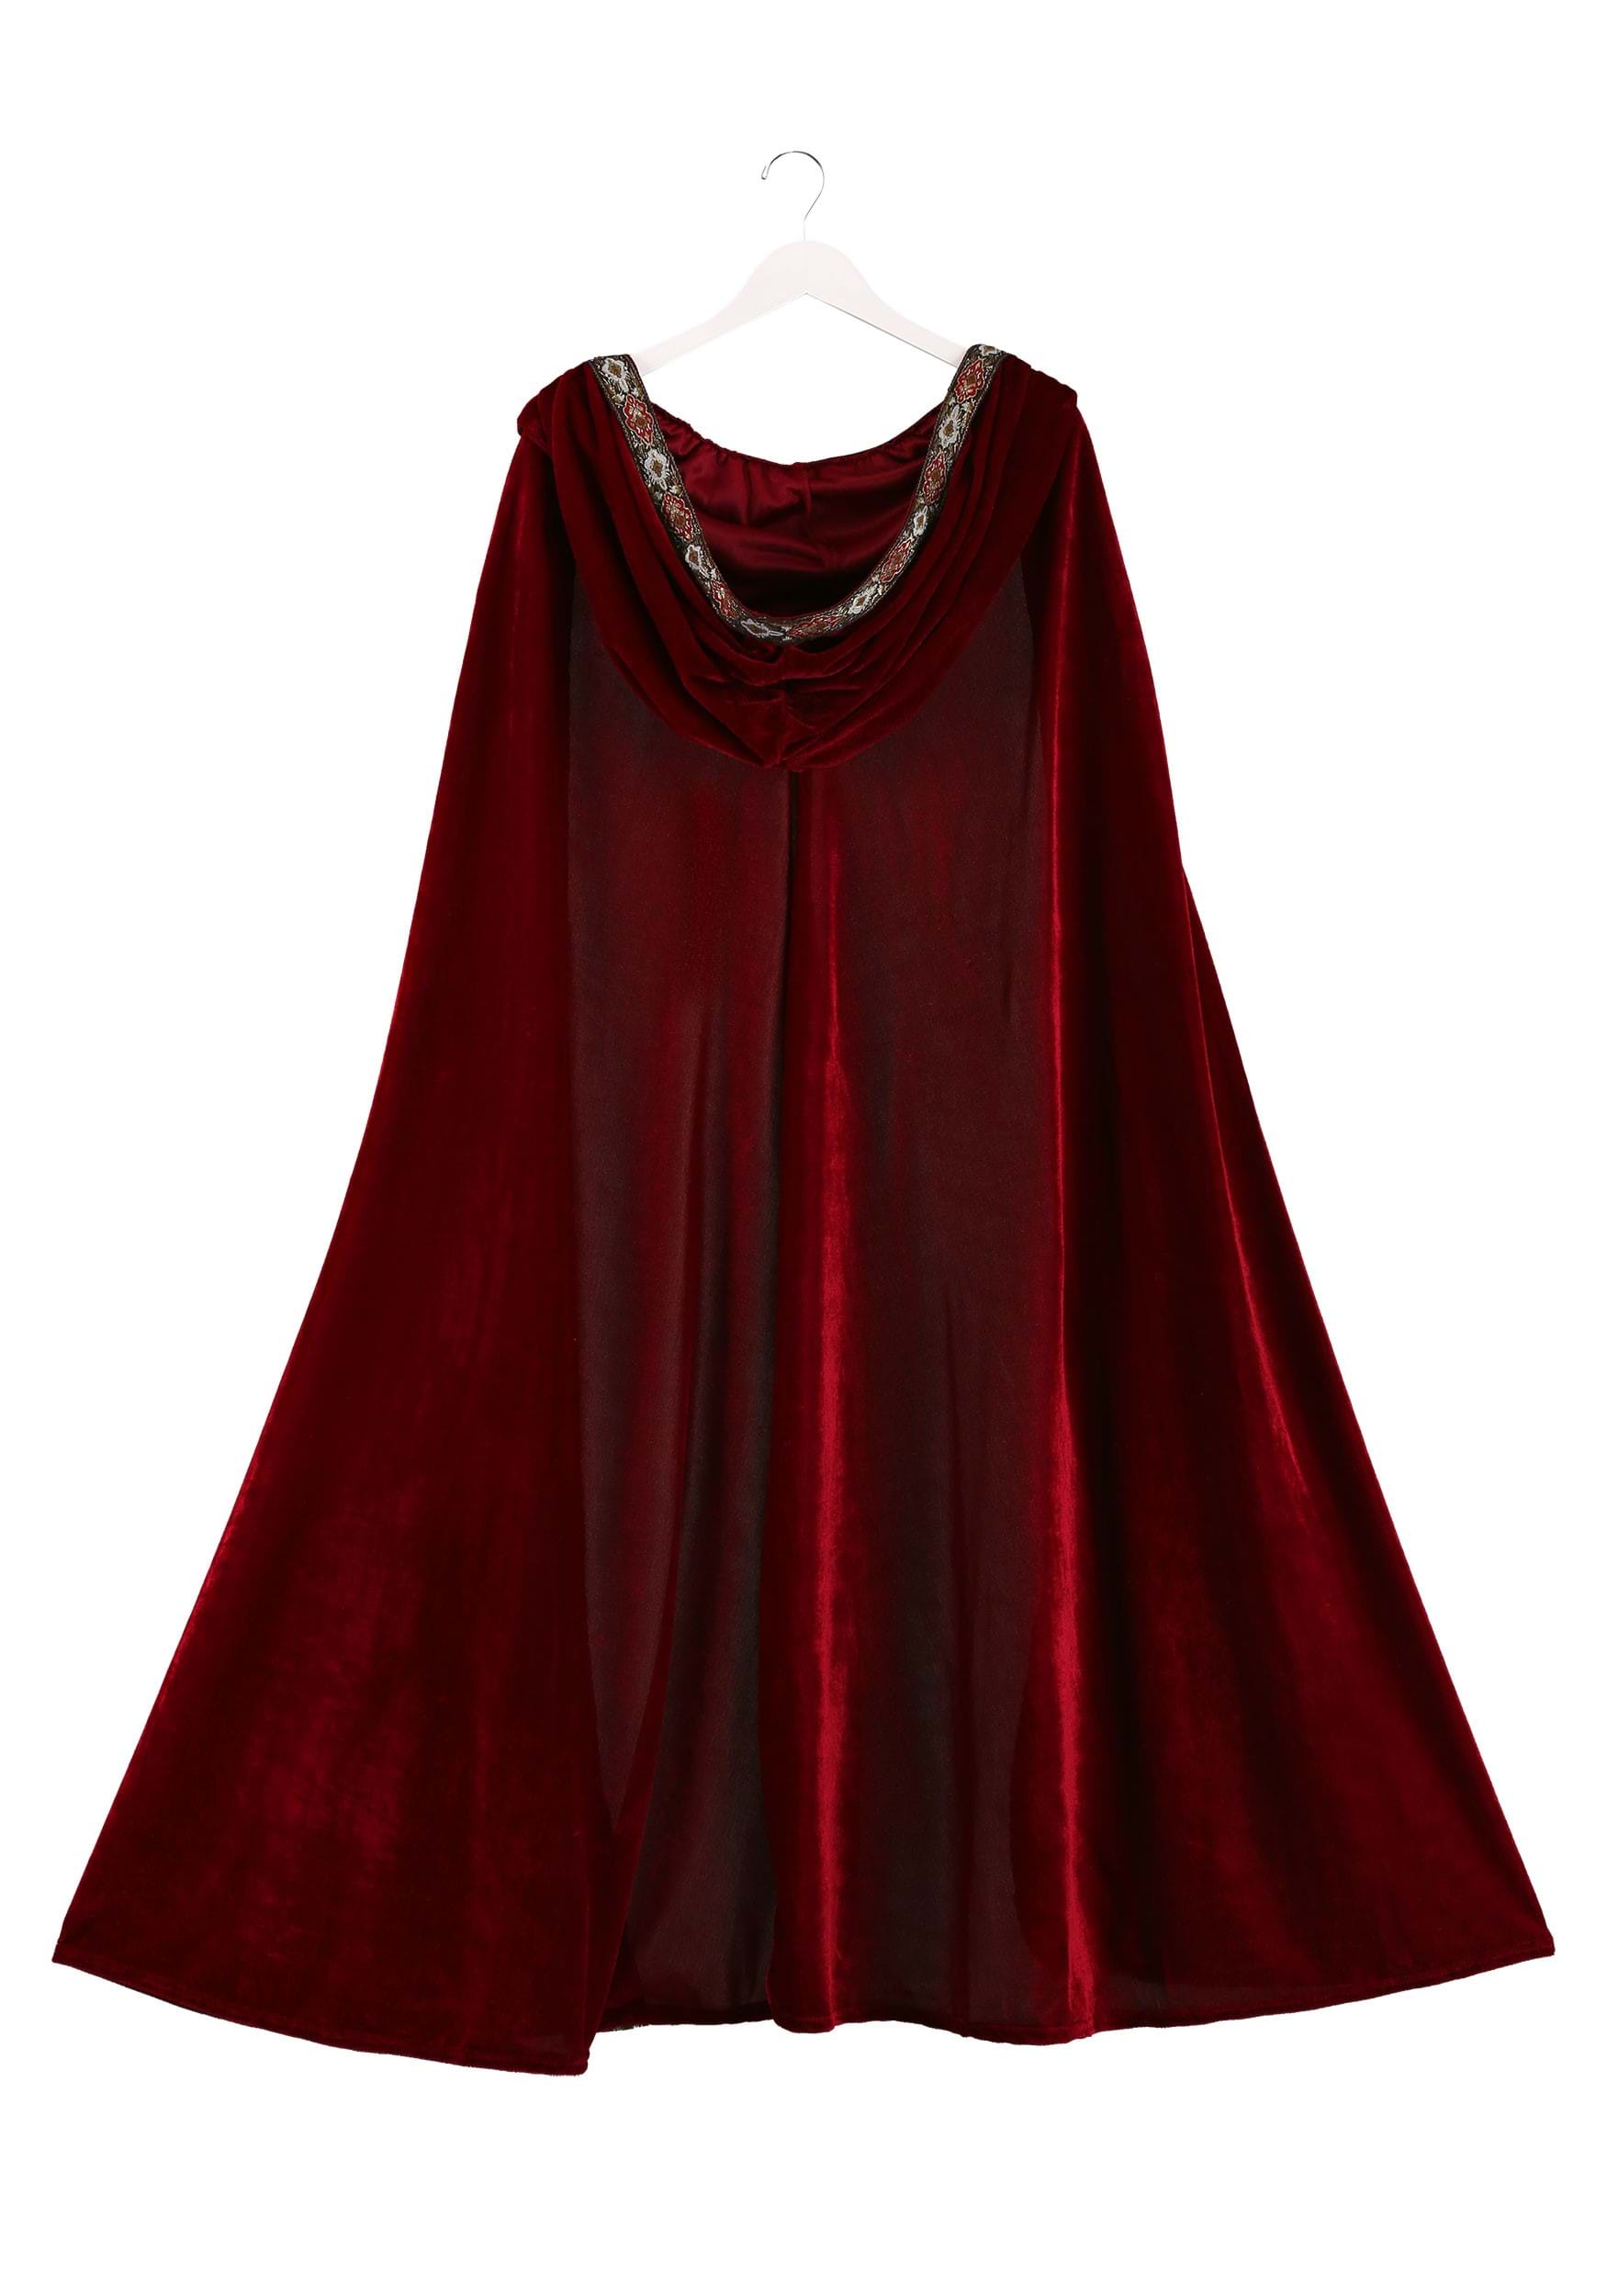 Deluxe Red Riding Hood Plus Size Fancy Dress Costume For Women , Exclusive